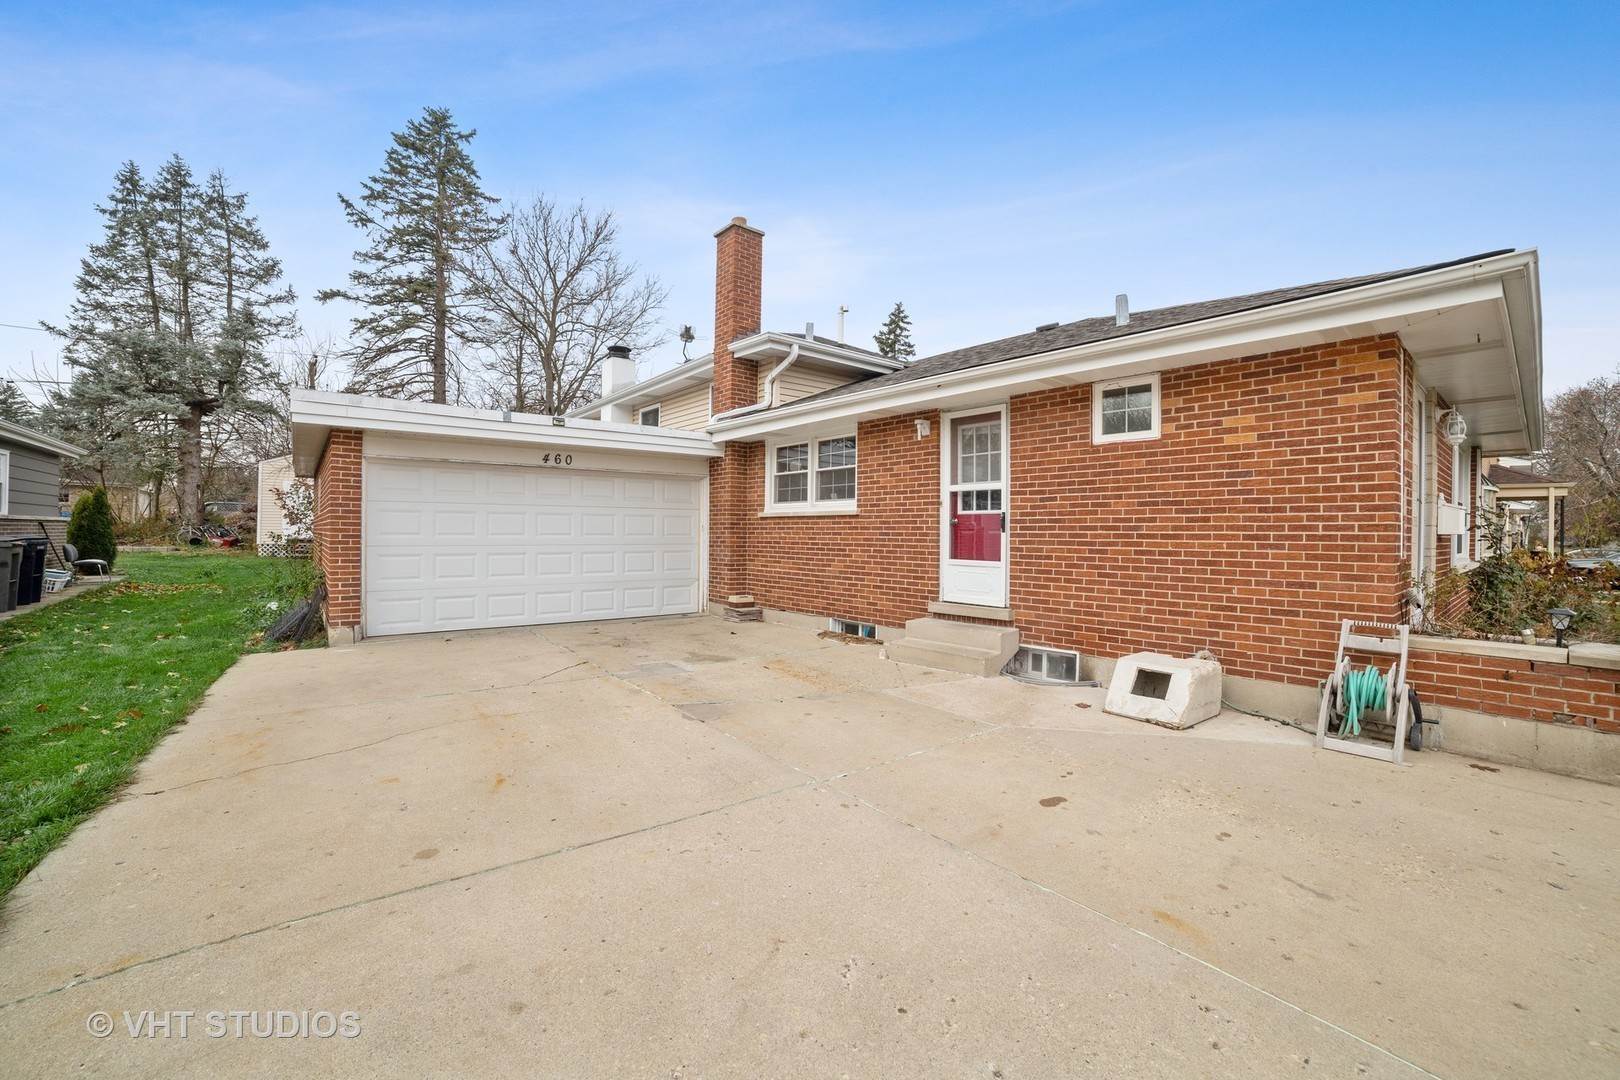 11. Single Family for Sale at Elgin, IL 60123